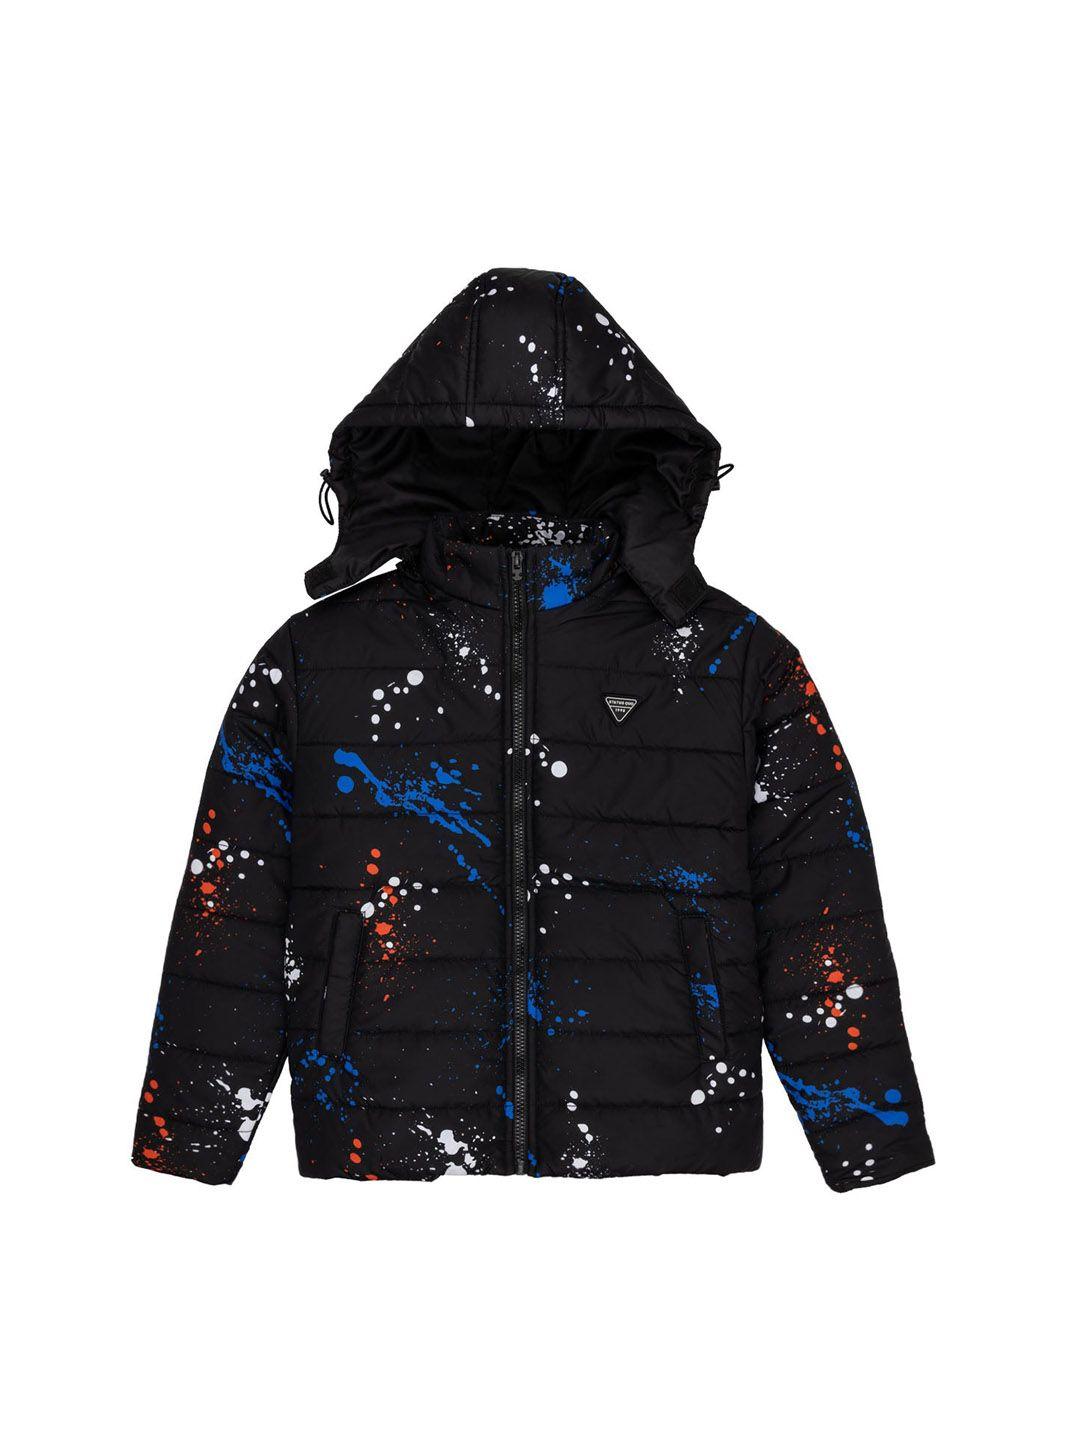 status quo boys abstract printed hooded puffer jacket